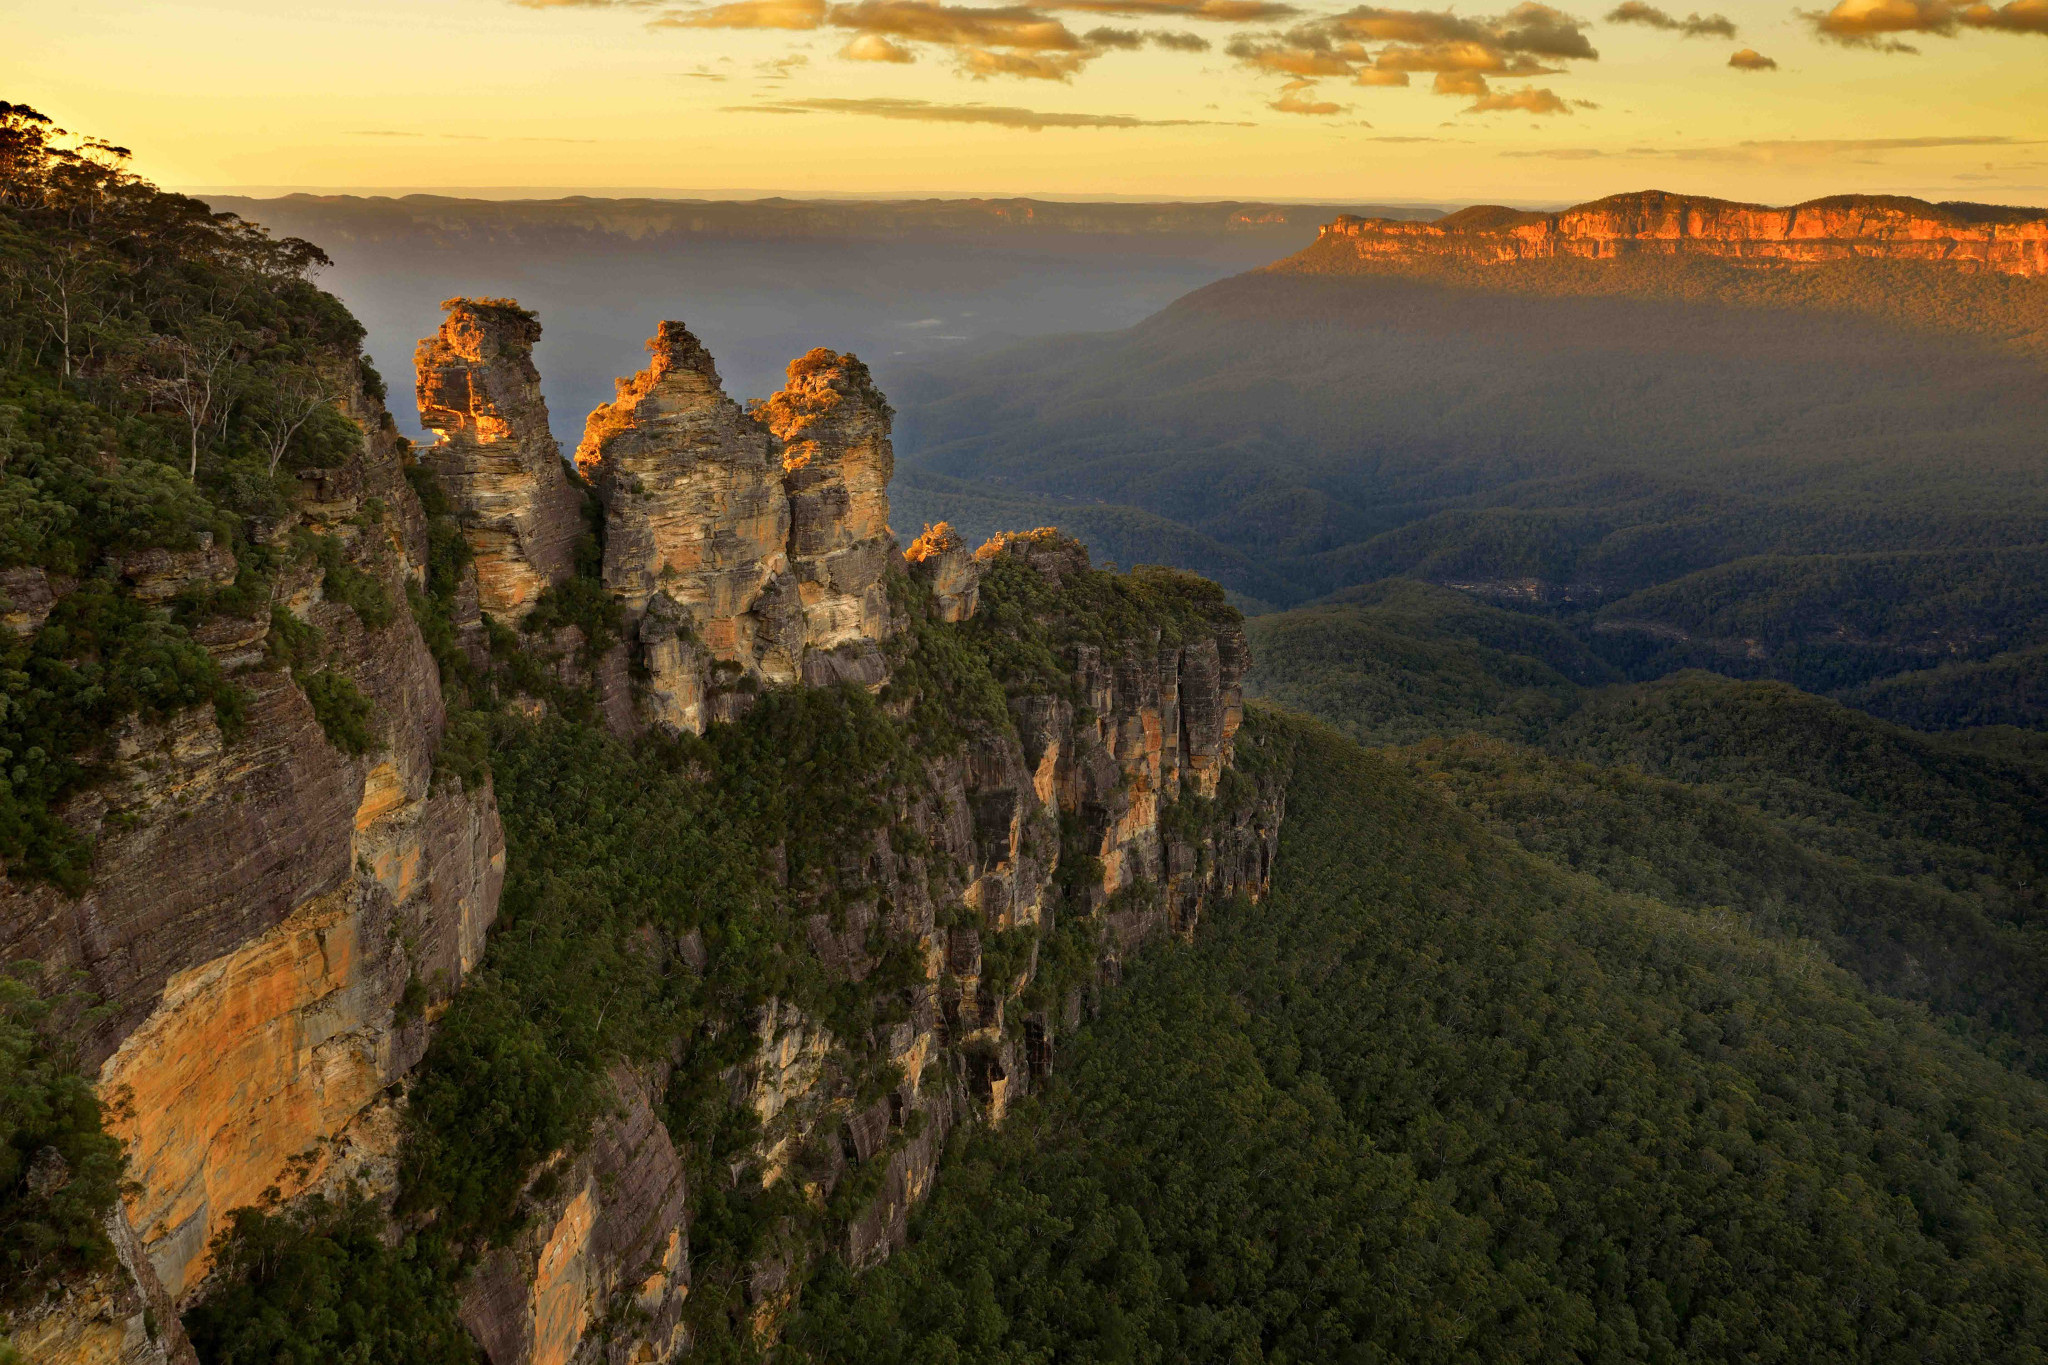 Greater Blue Mountains World Heritage Area (showing the landforms around the Three Sisters). National Library image.